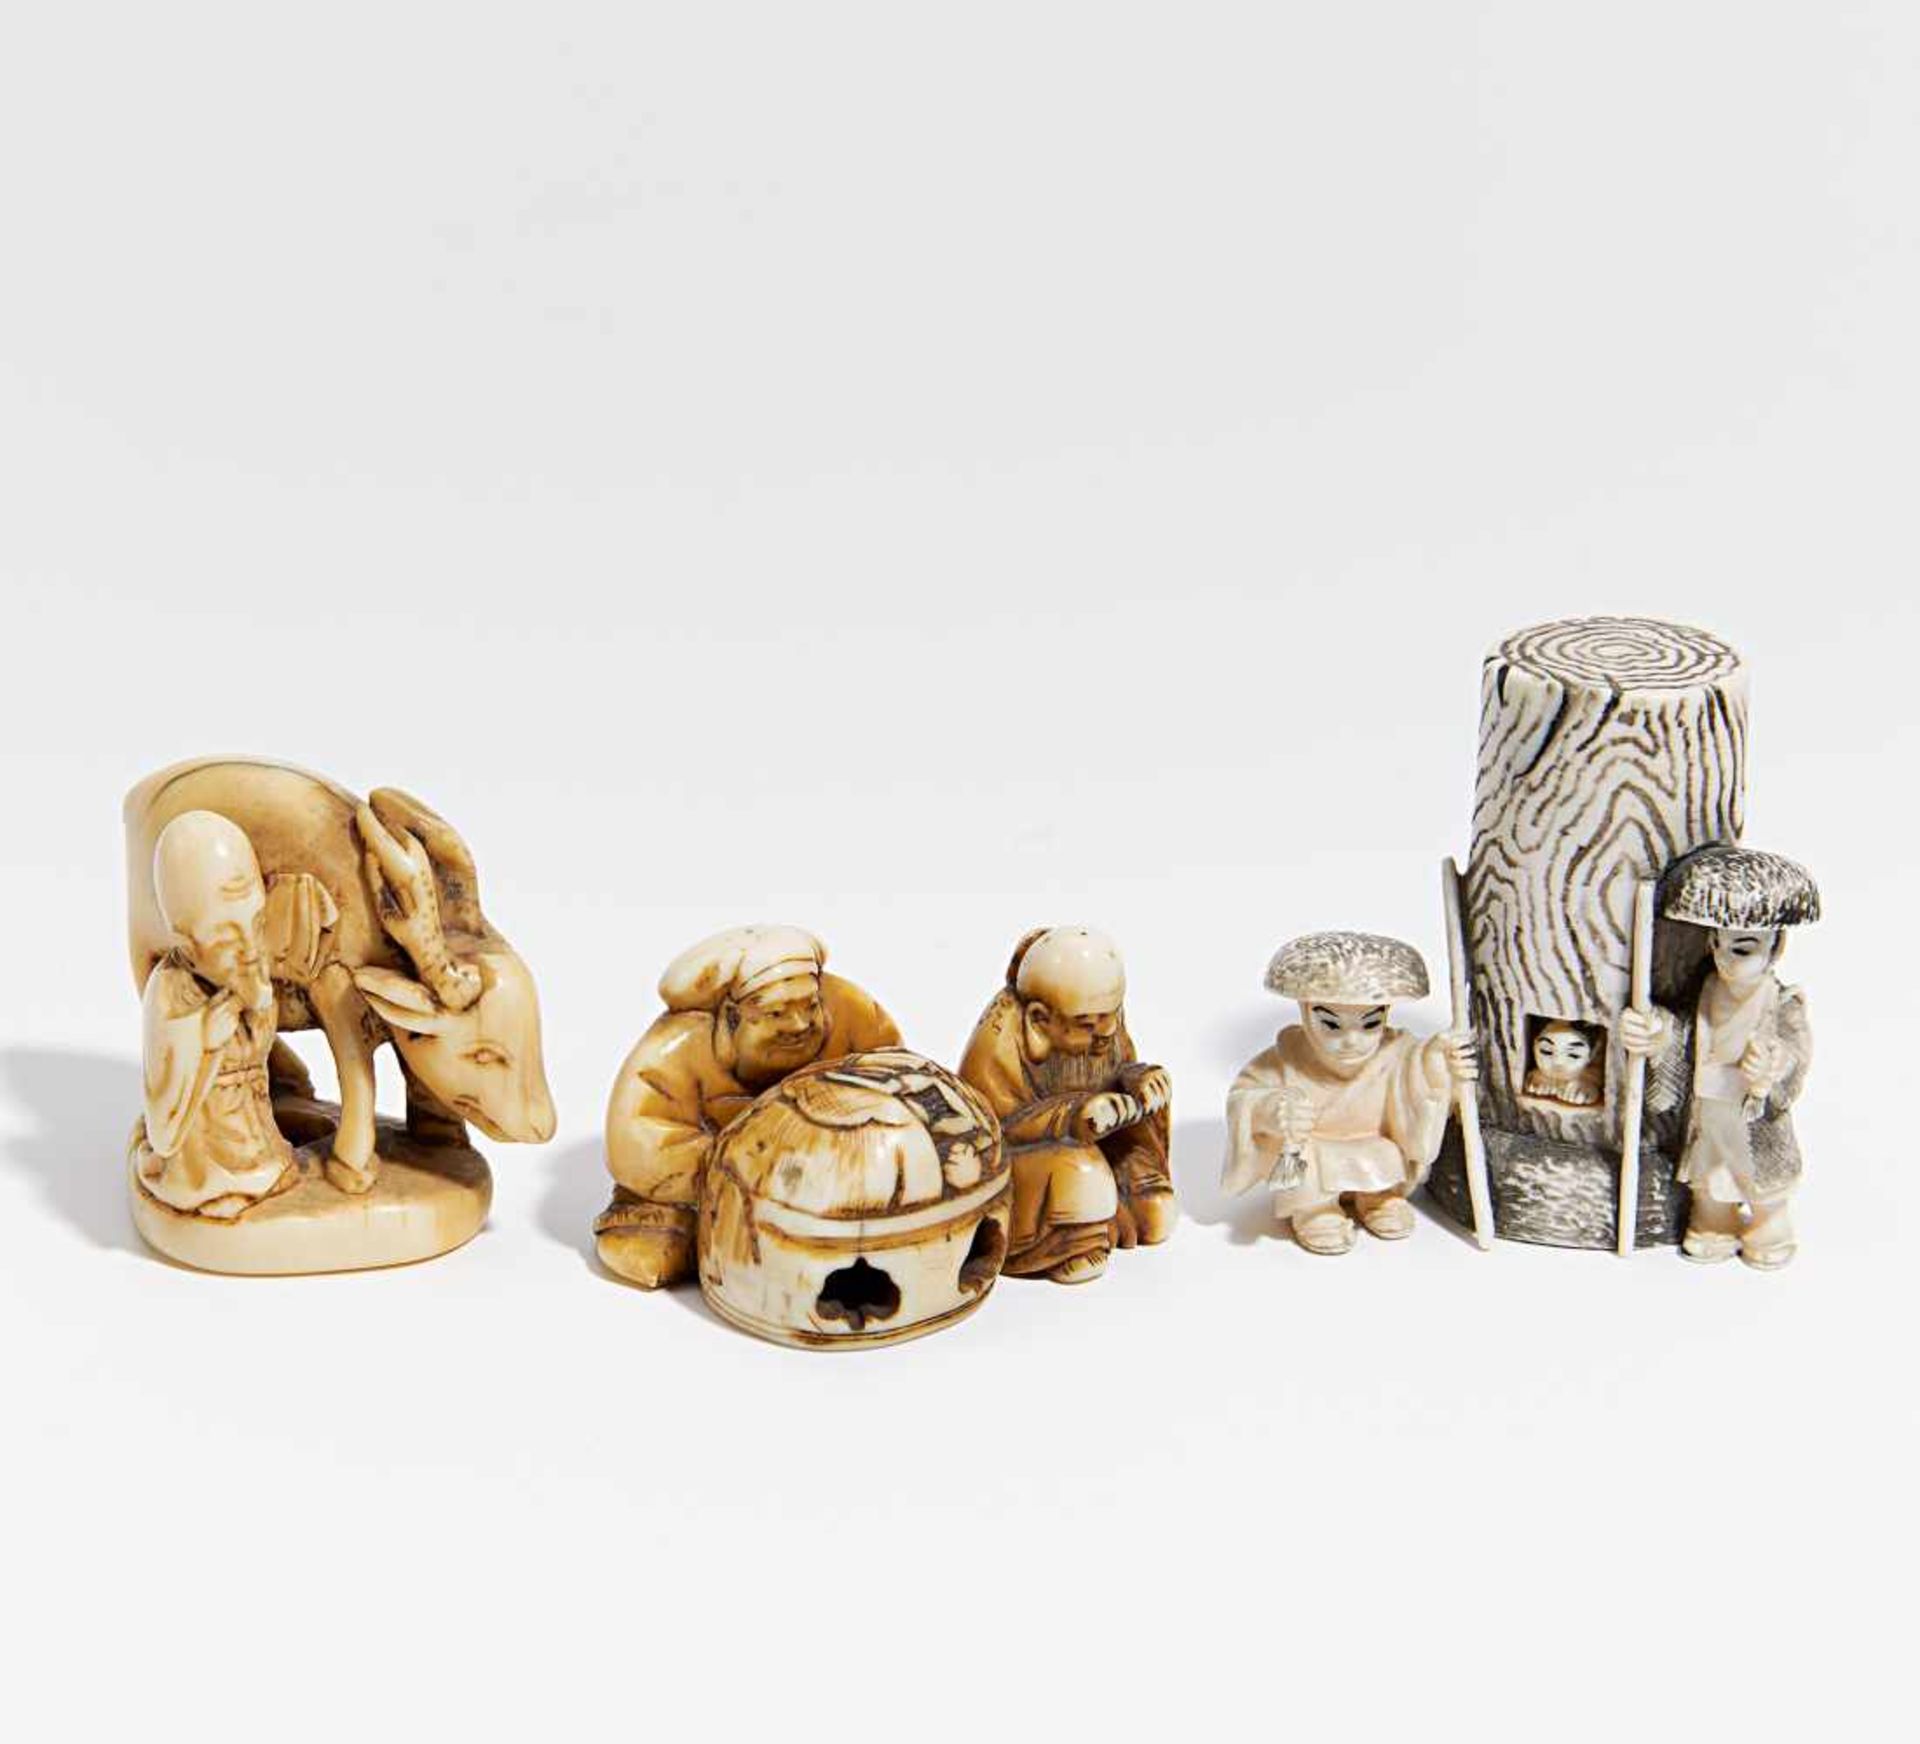 TWO NETSUKE WITH GOOD FORTUNE GODS.